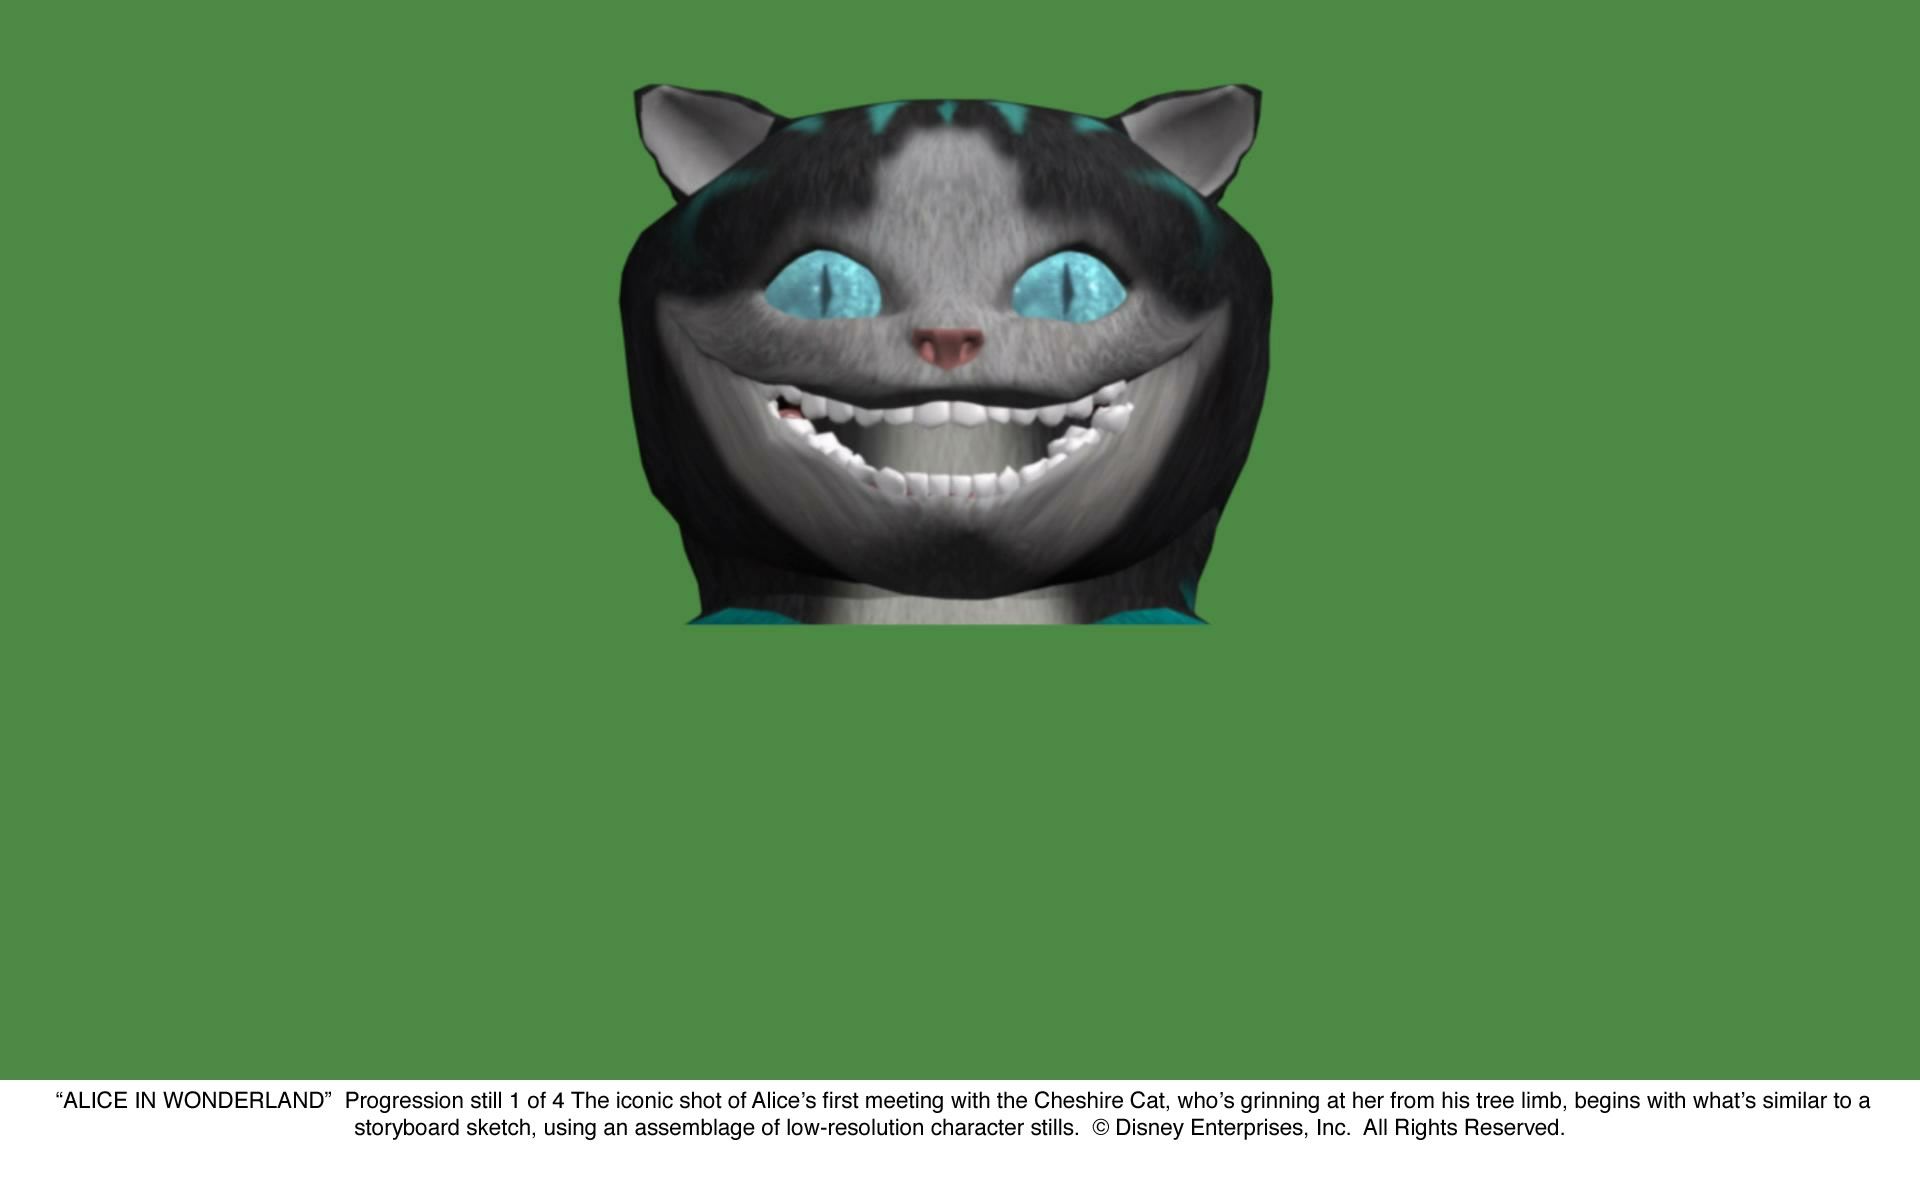 The Cheshire Cat against green screen